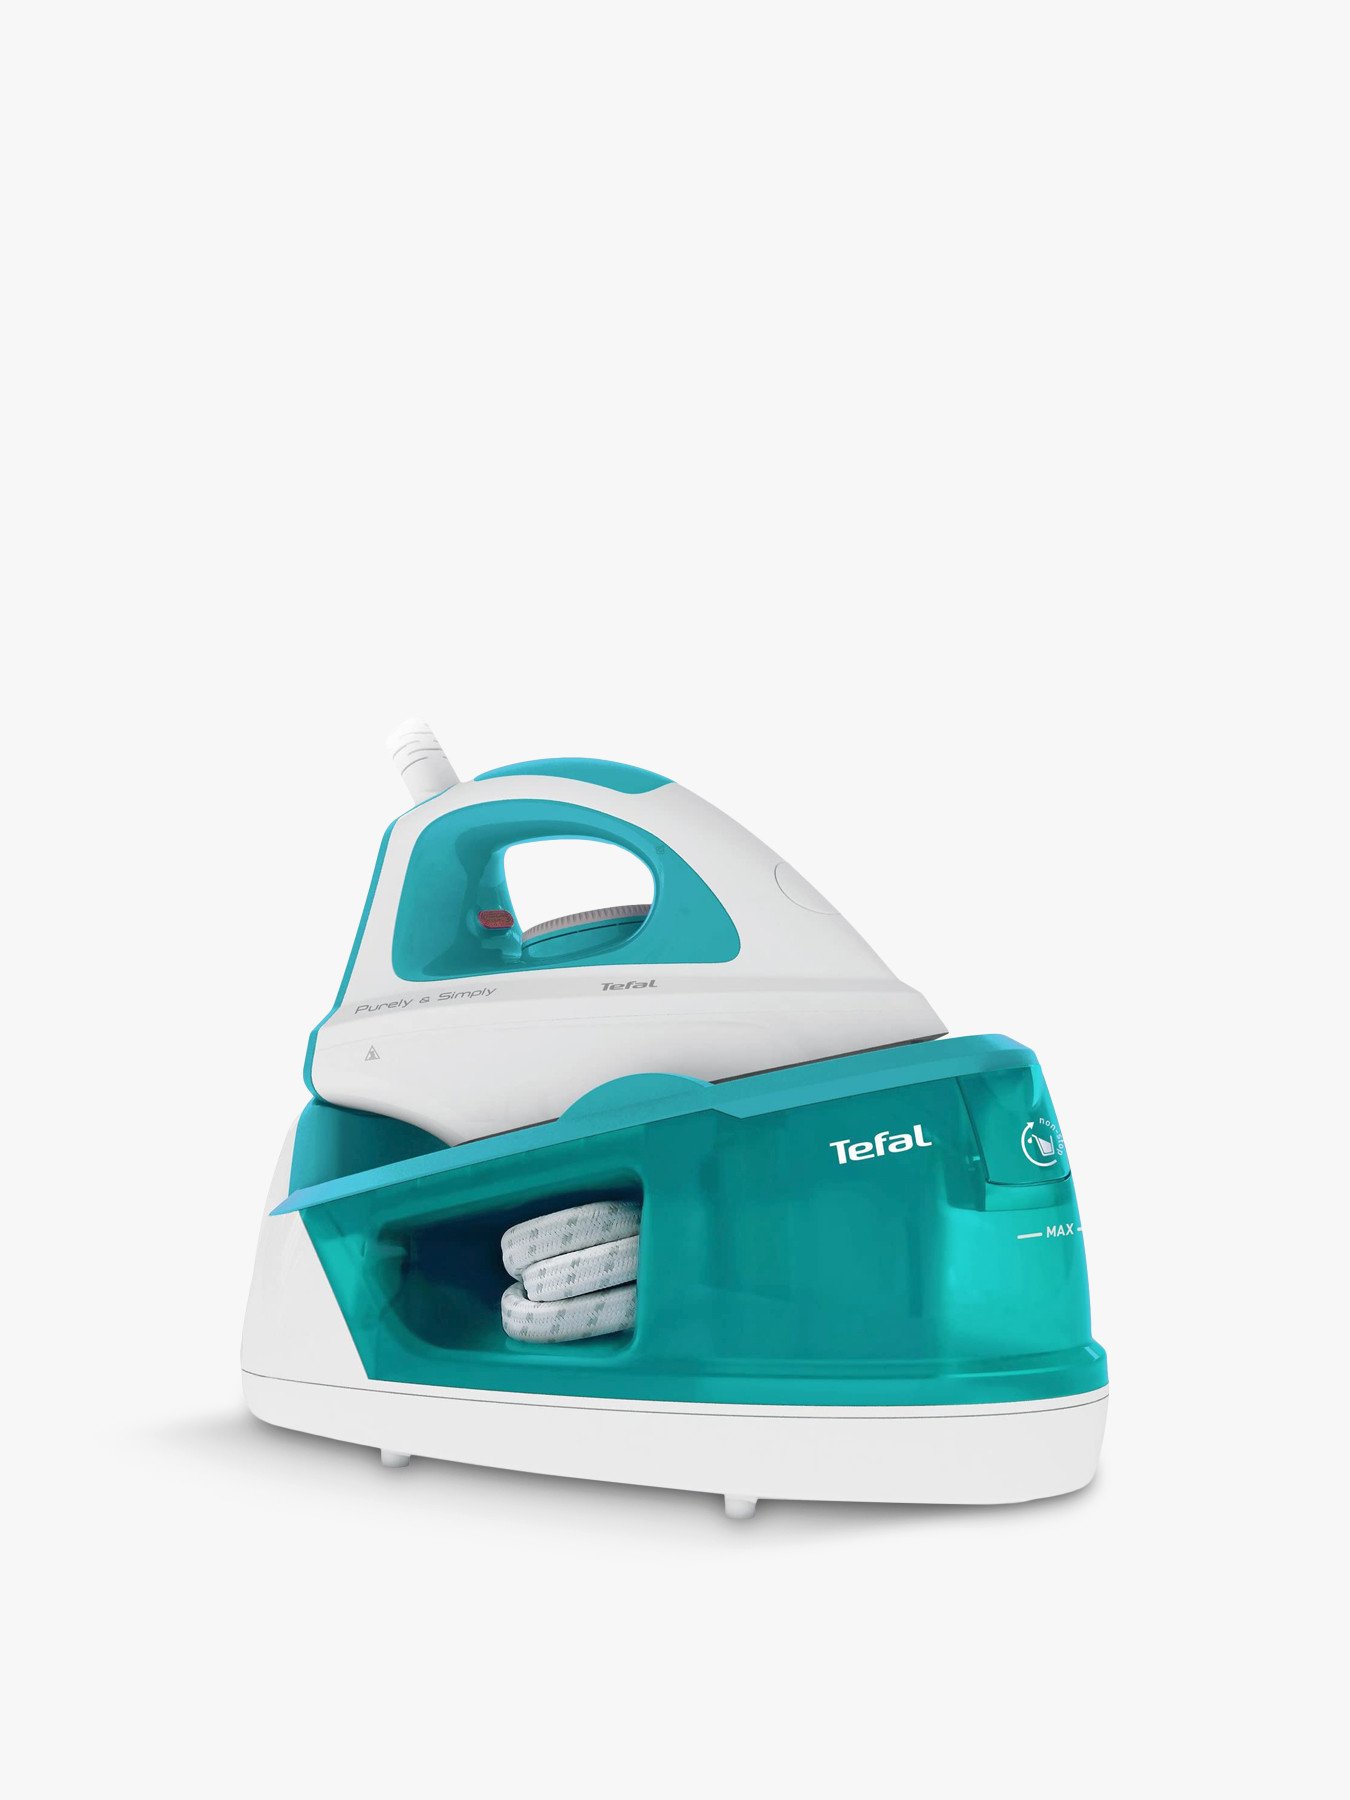 Tefal Purely And Simply SV5011 Steam Generator Iron | Fenwick